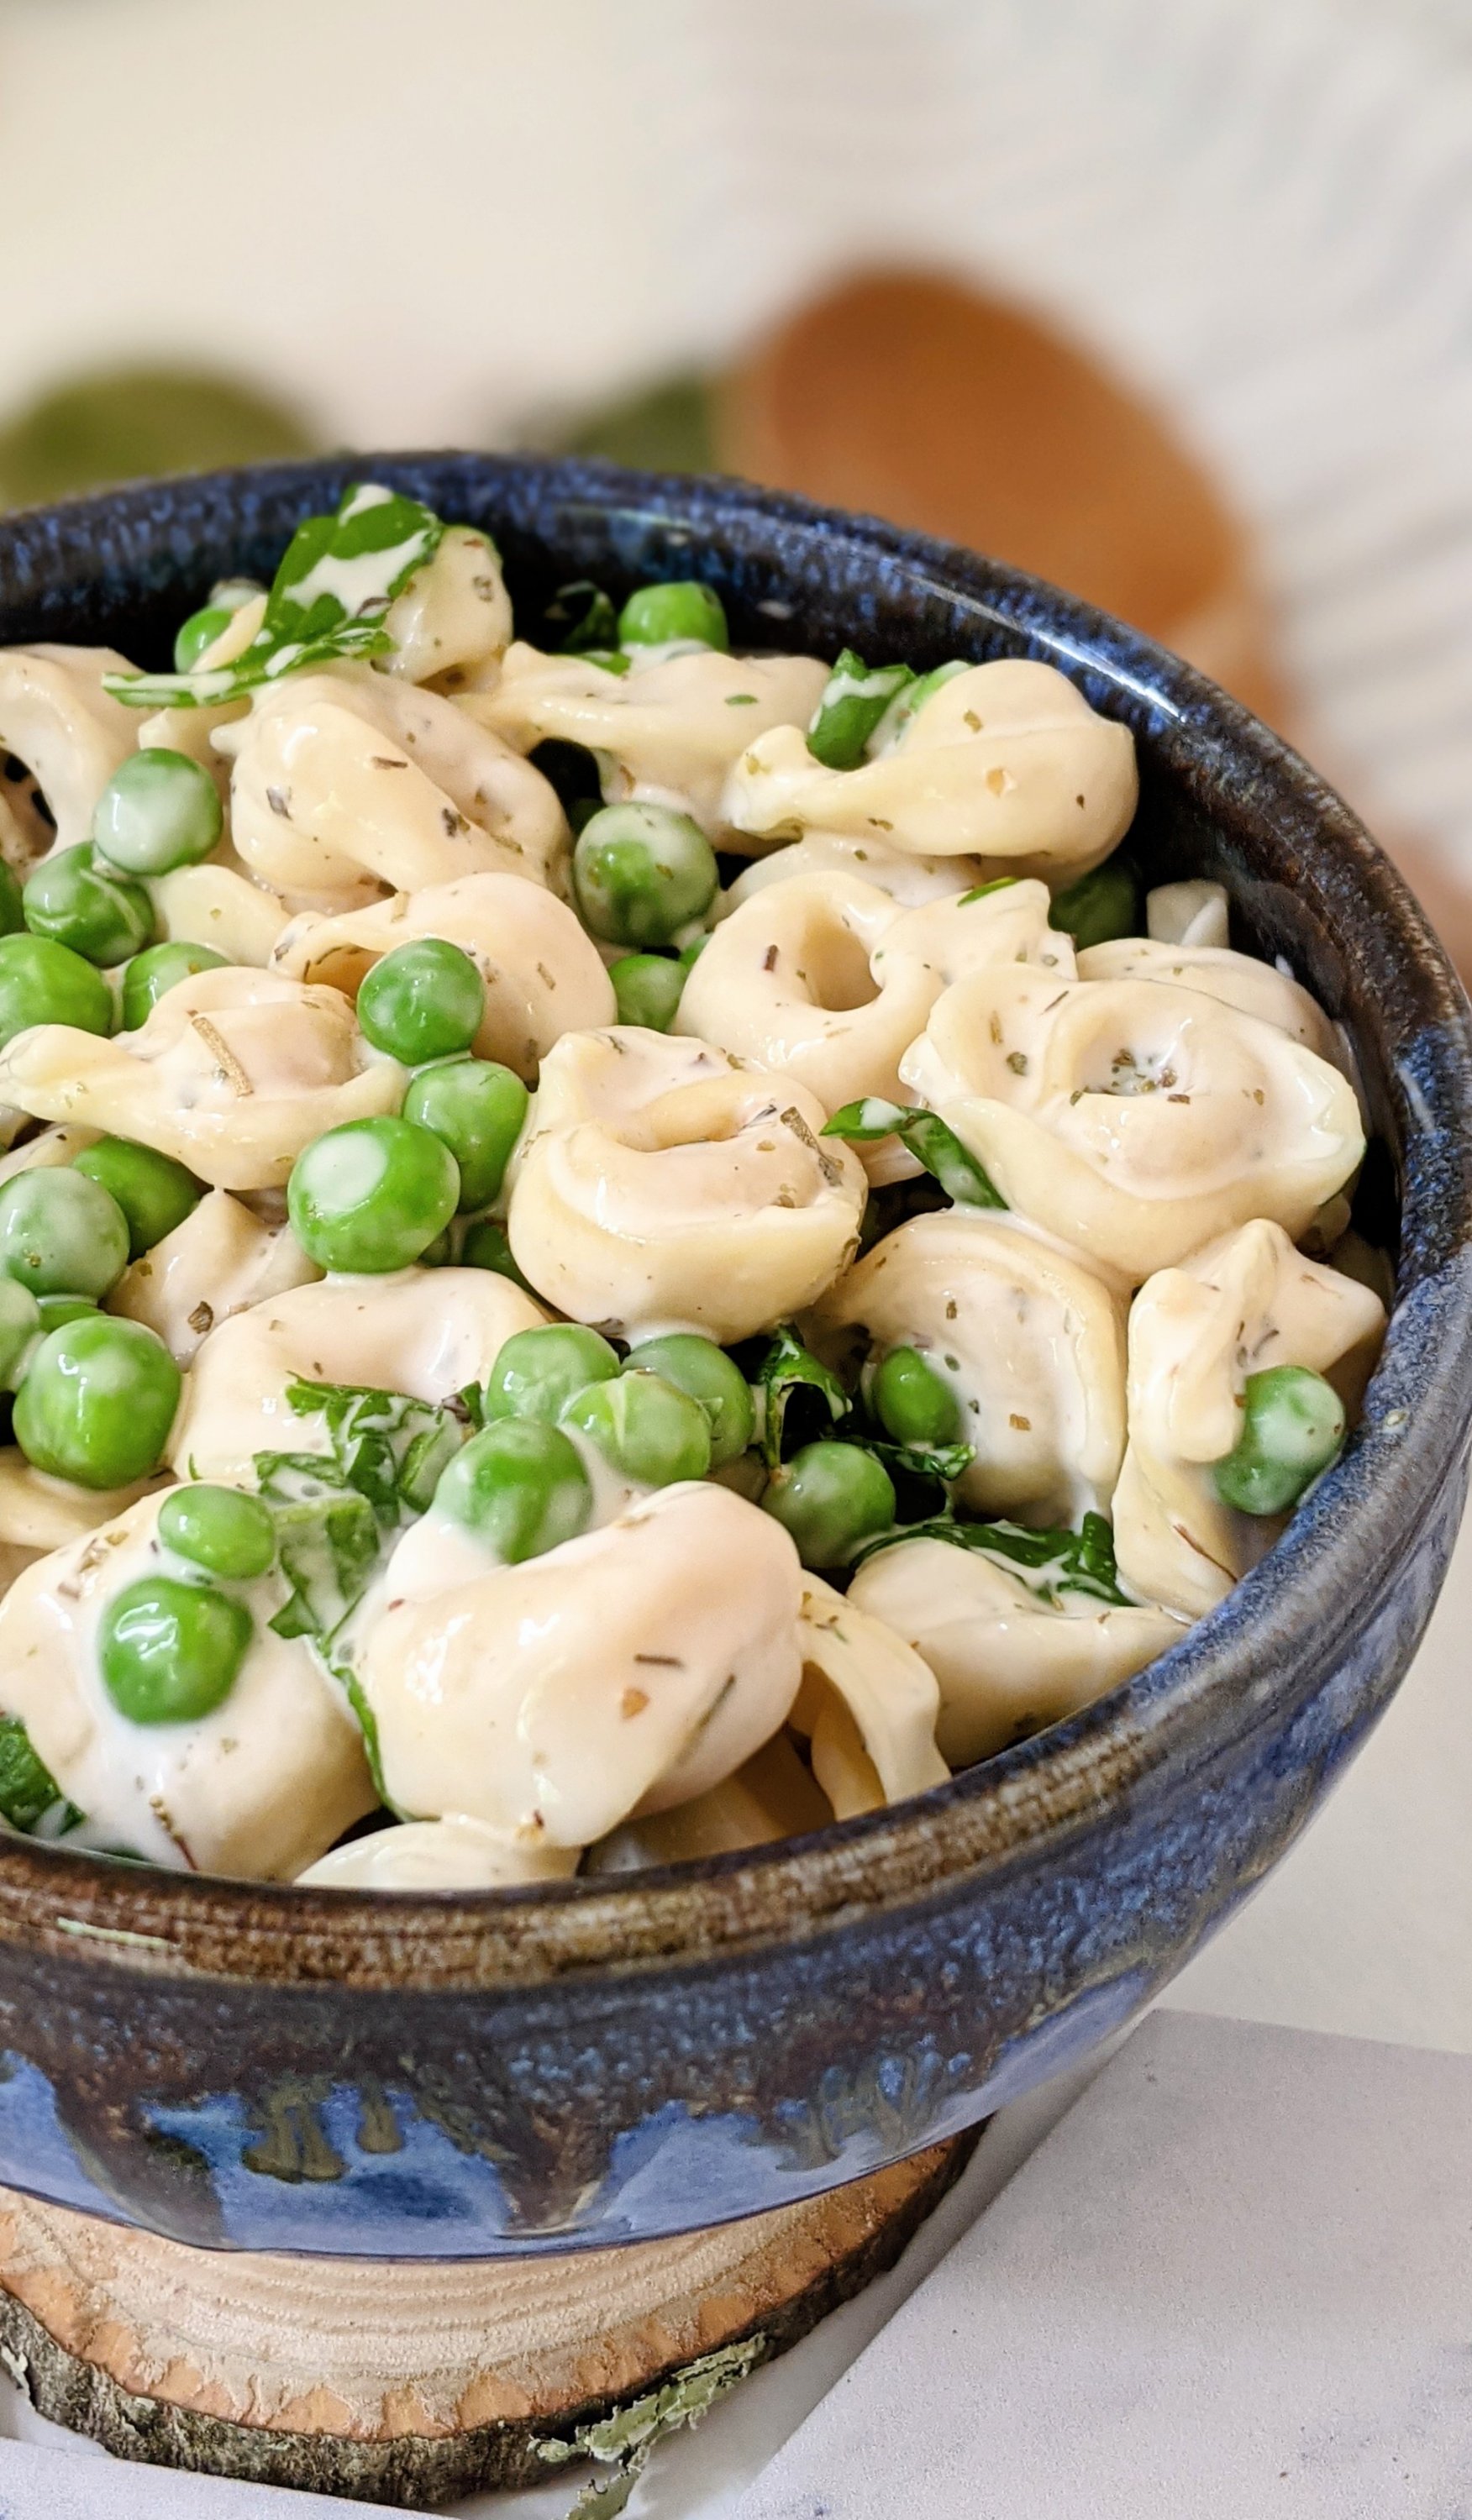 creamy make ahead pasta salad recipe vegetarian meatless make ahead sides pasta salad with tortellini and ranch dressing italian seasoning peas spinach and mayo